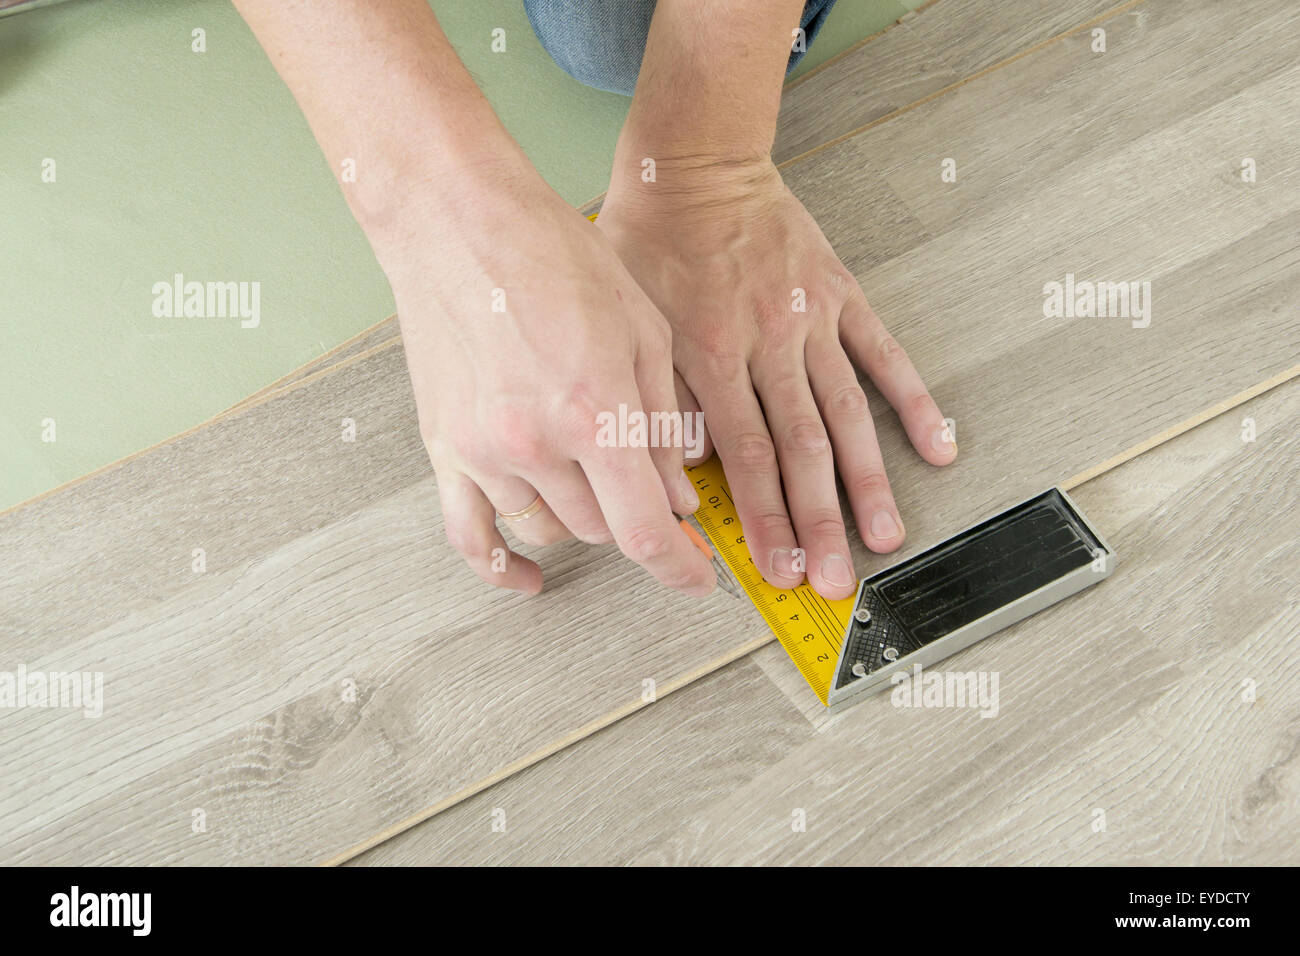 Man With Tools To Laying Laminate Stock Photo 85732667 Alamy